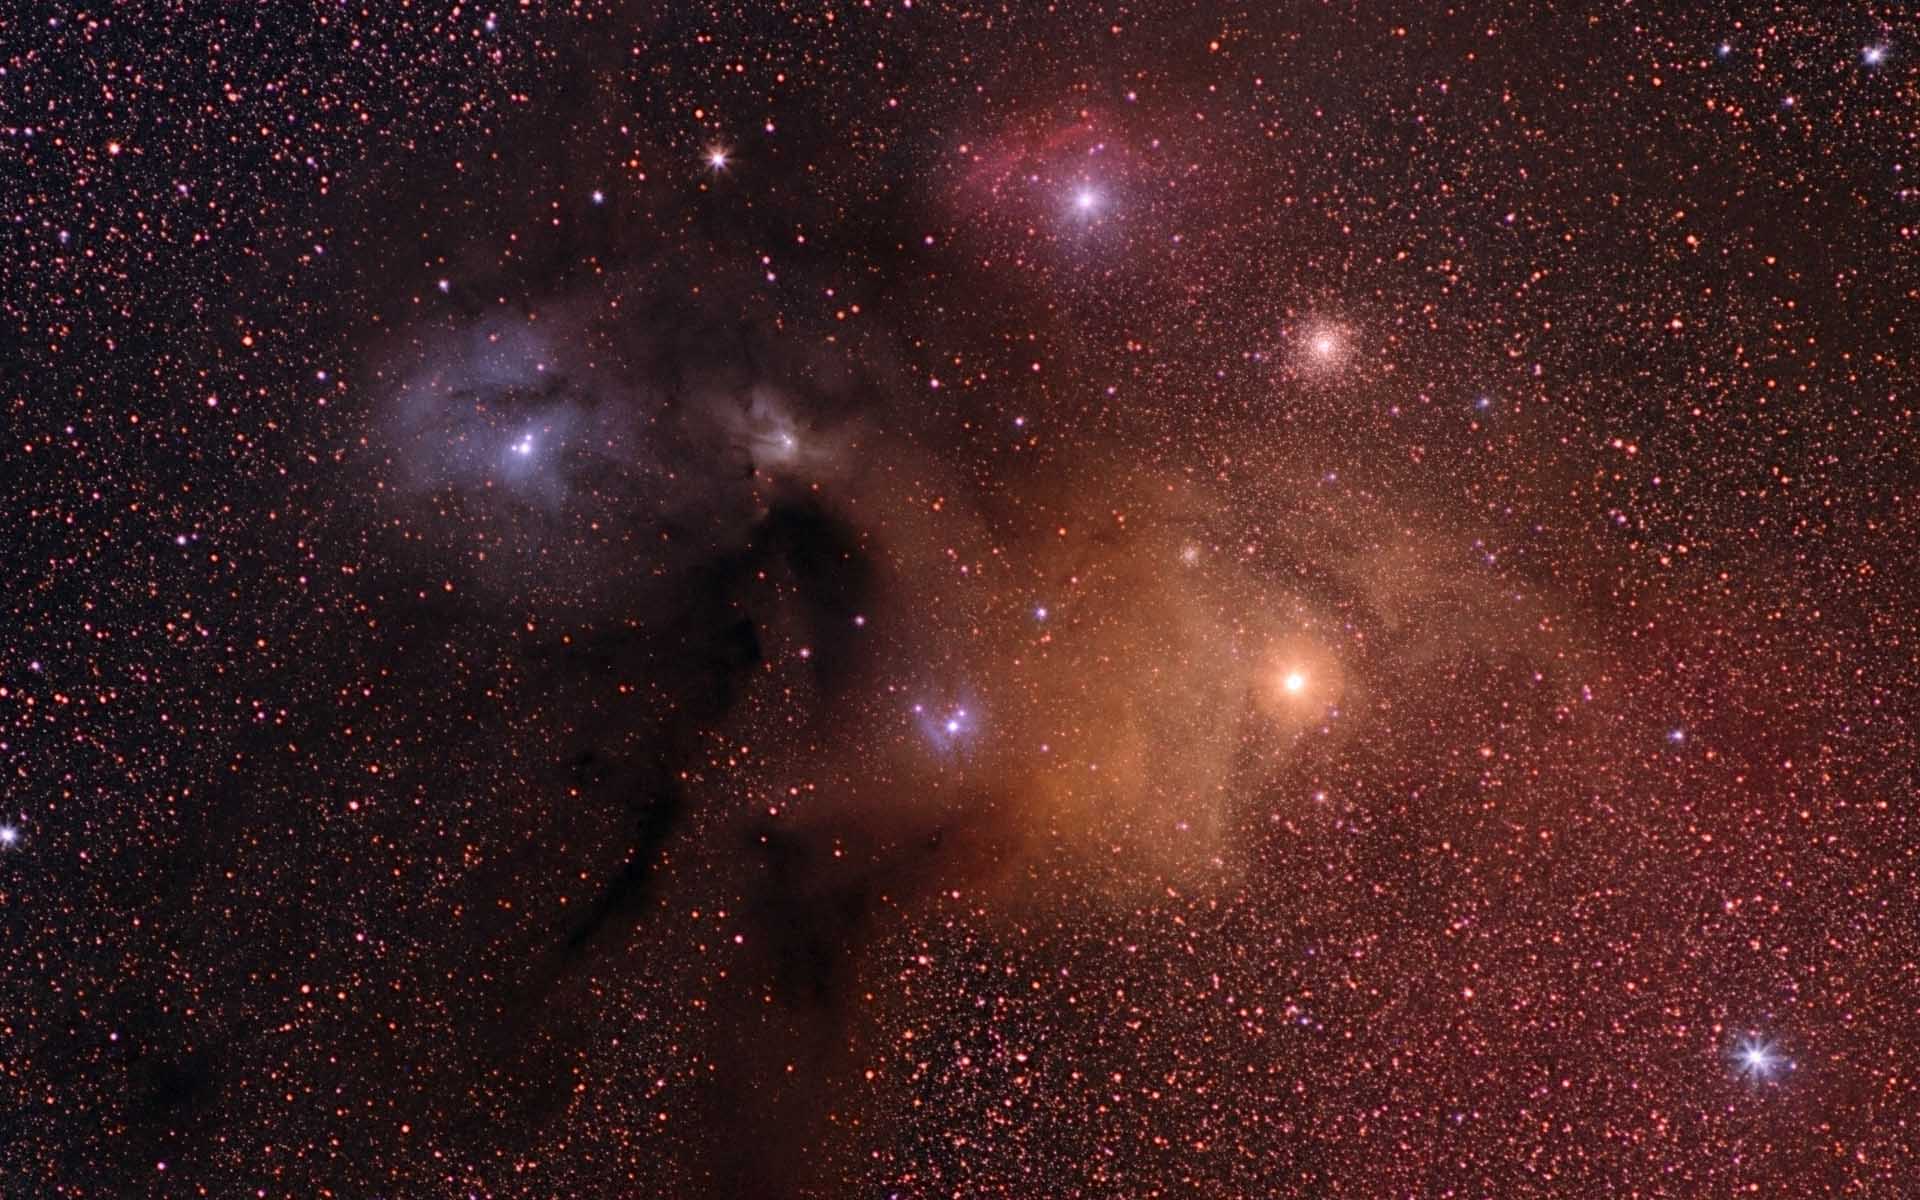 Antares Image (Picture of the Antares area in Scorpius)